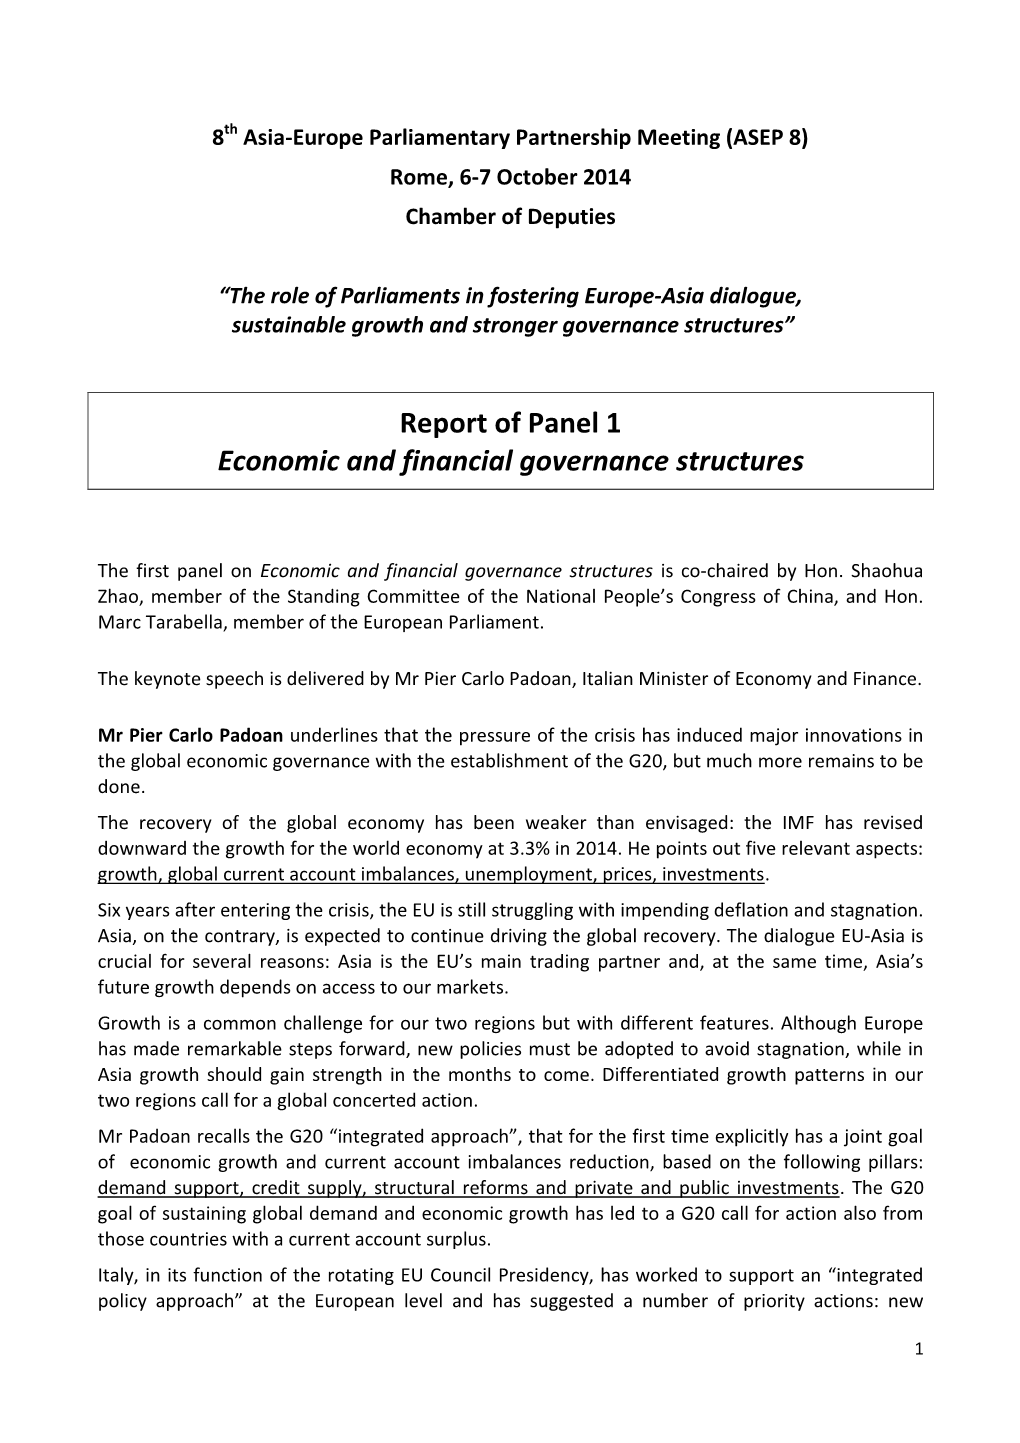 Report of Panel 1 Economic and Financial Governance Structures